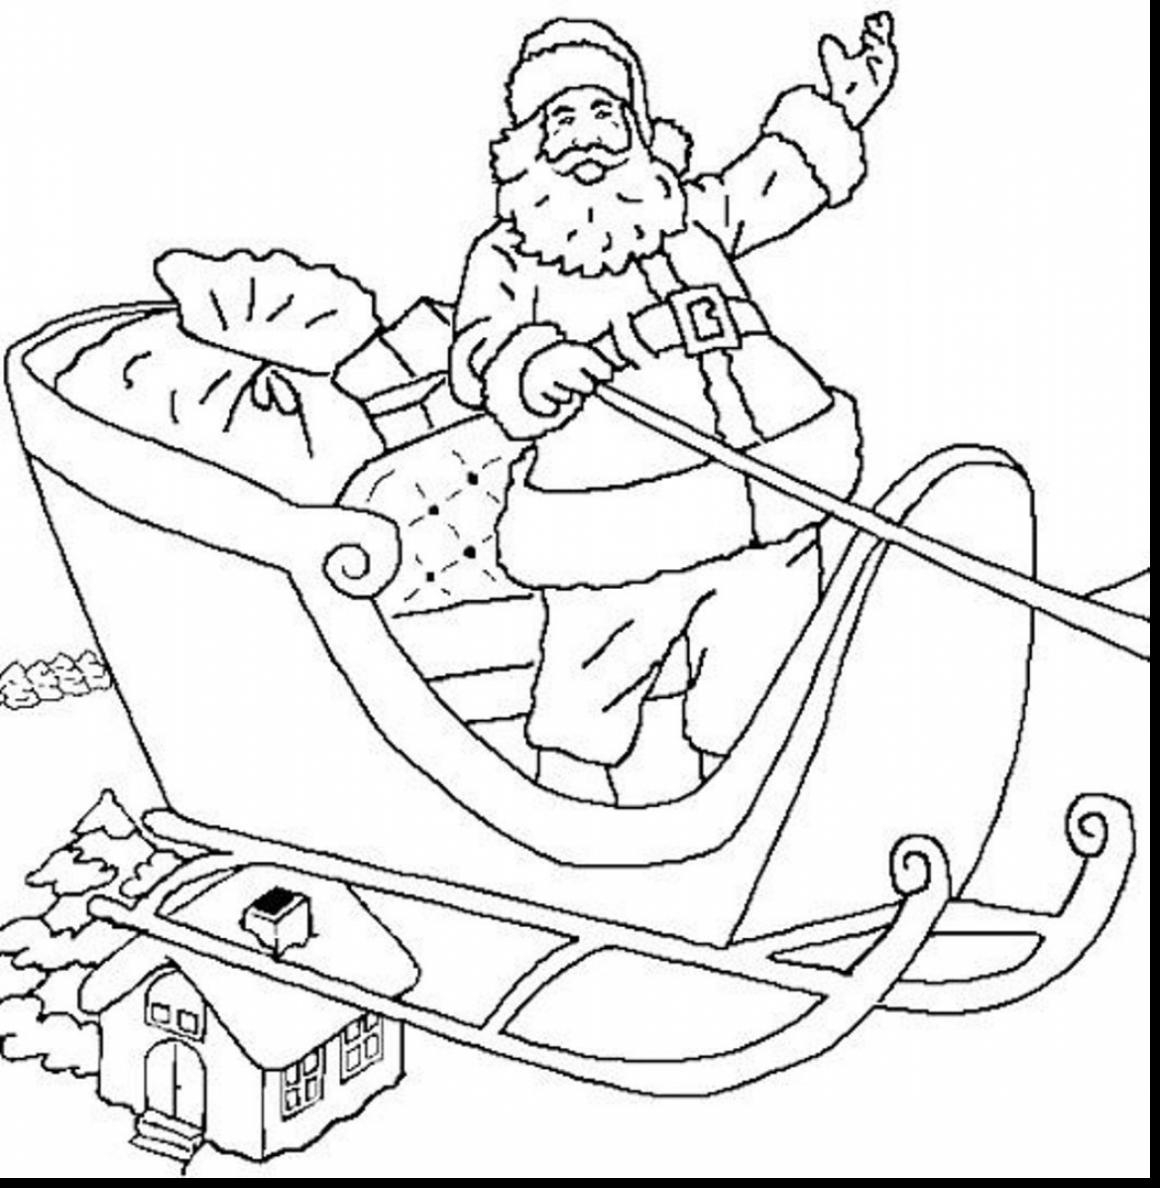 Santa Claus In Sleigh Coloring Page Santa Sled Coloring Page Chrismast And New Year